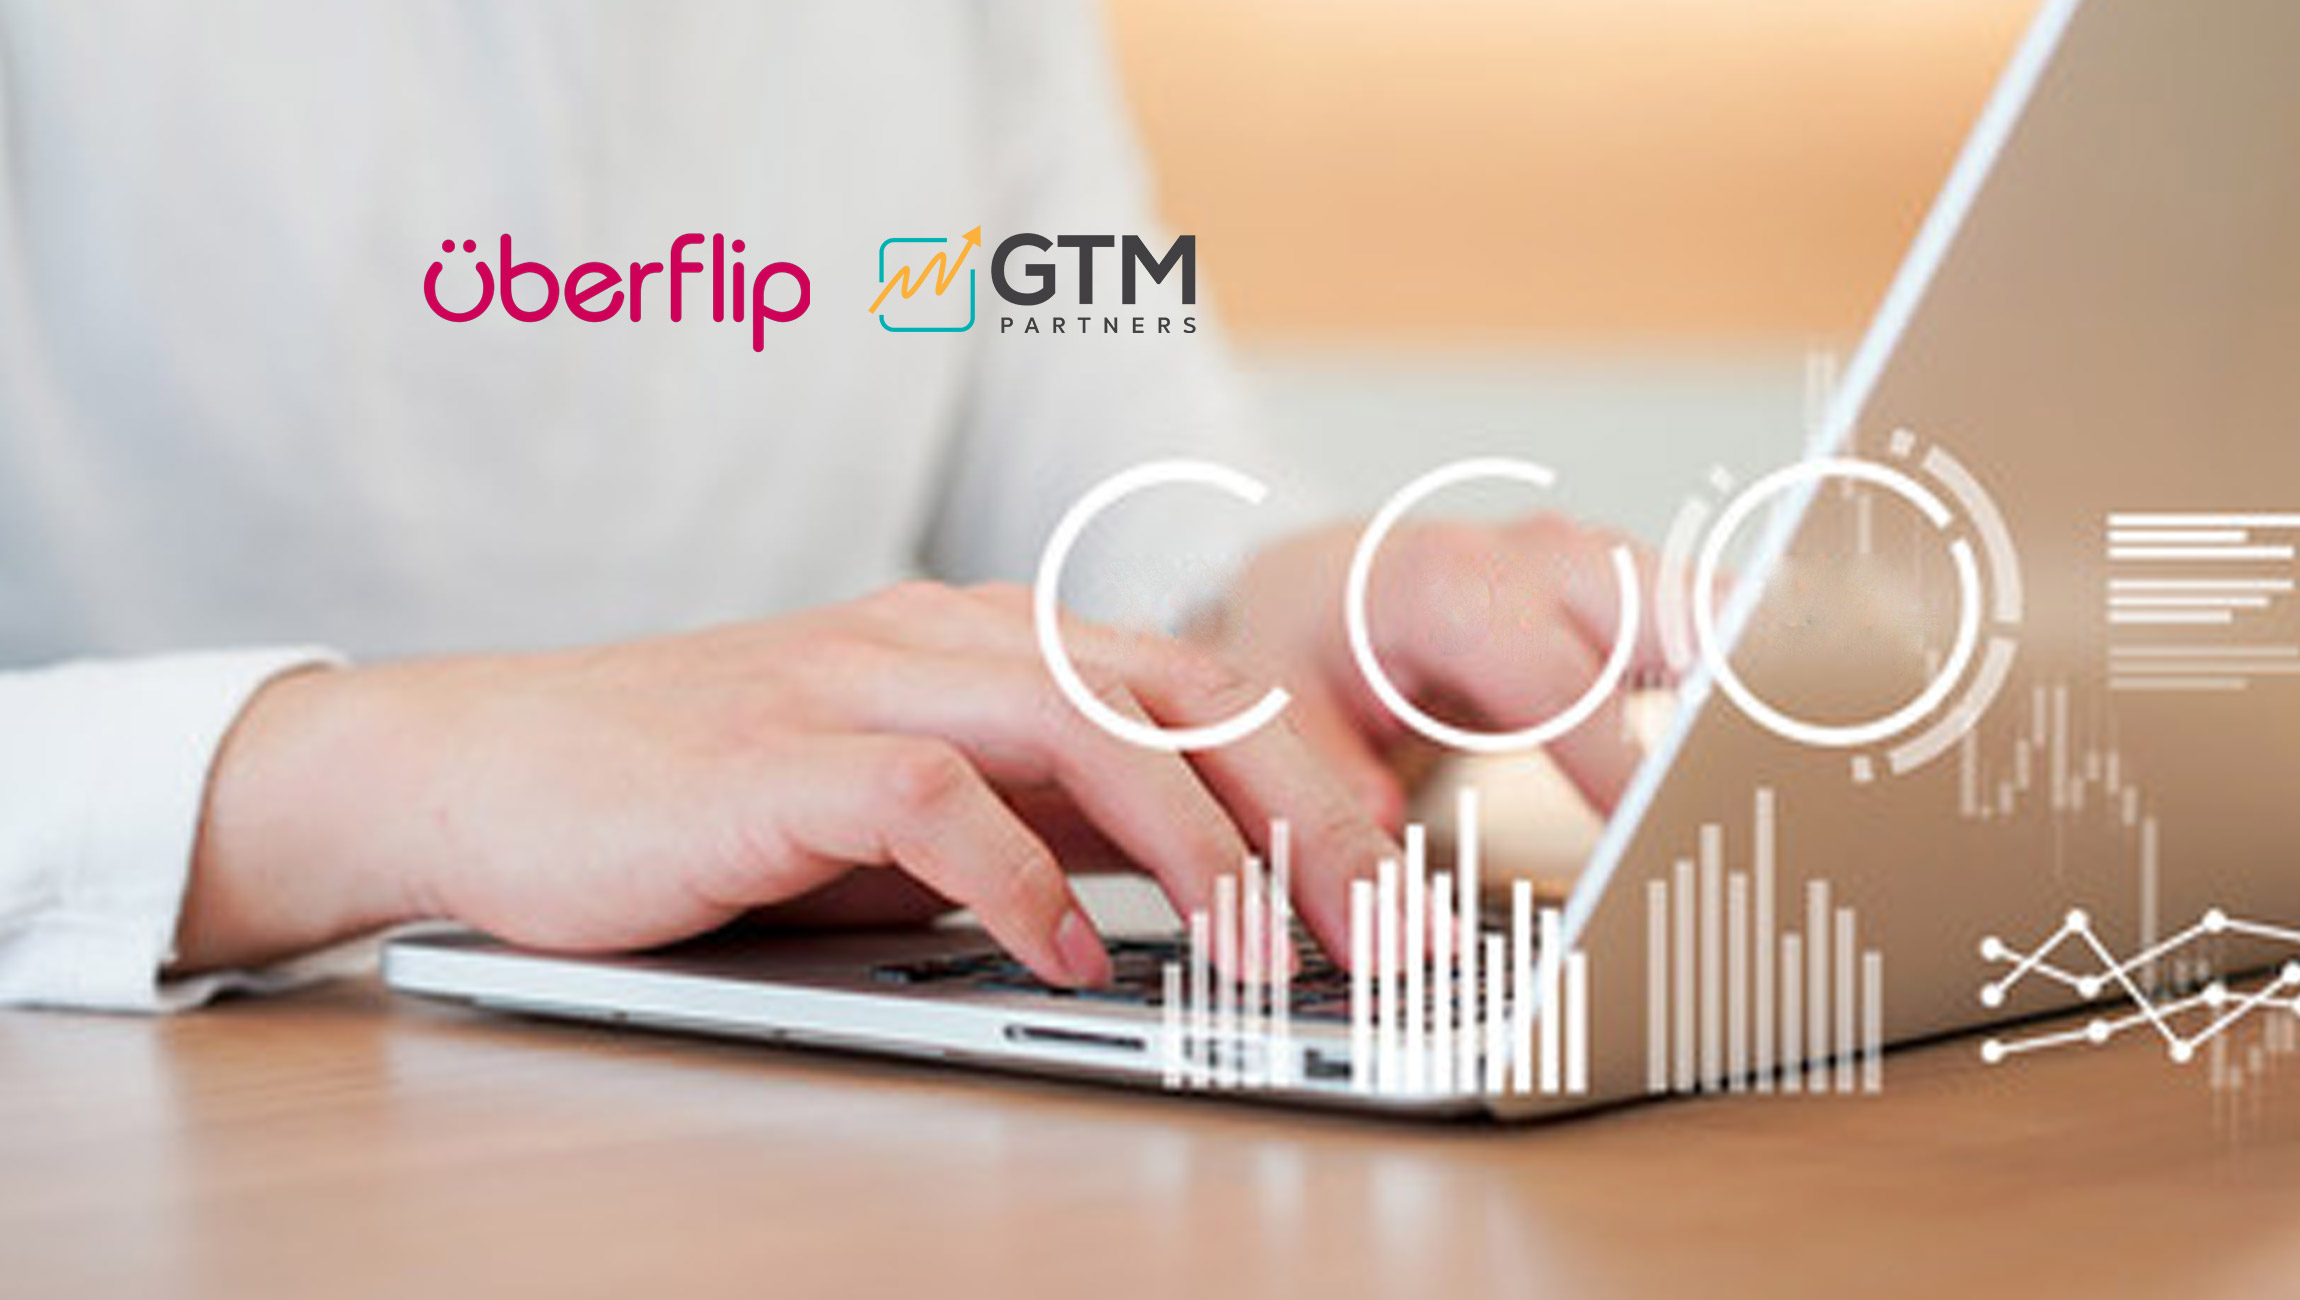 Uberflip Announces Findings From ROI Study Conducted by GTM Partners